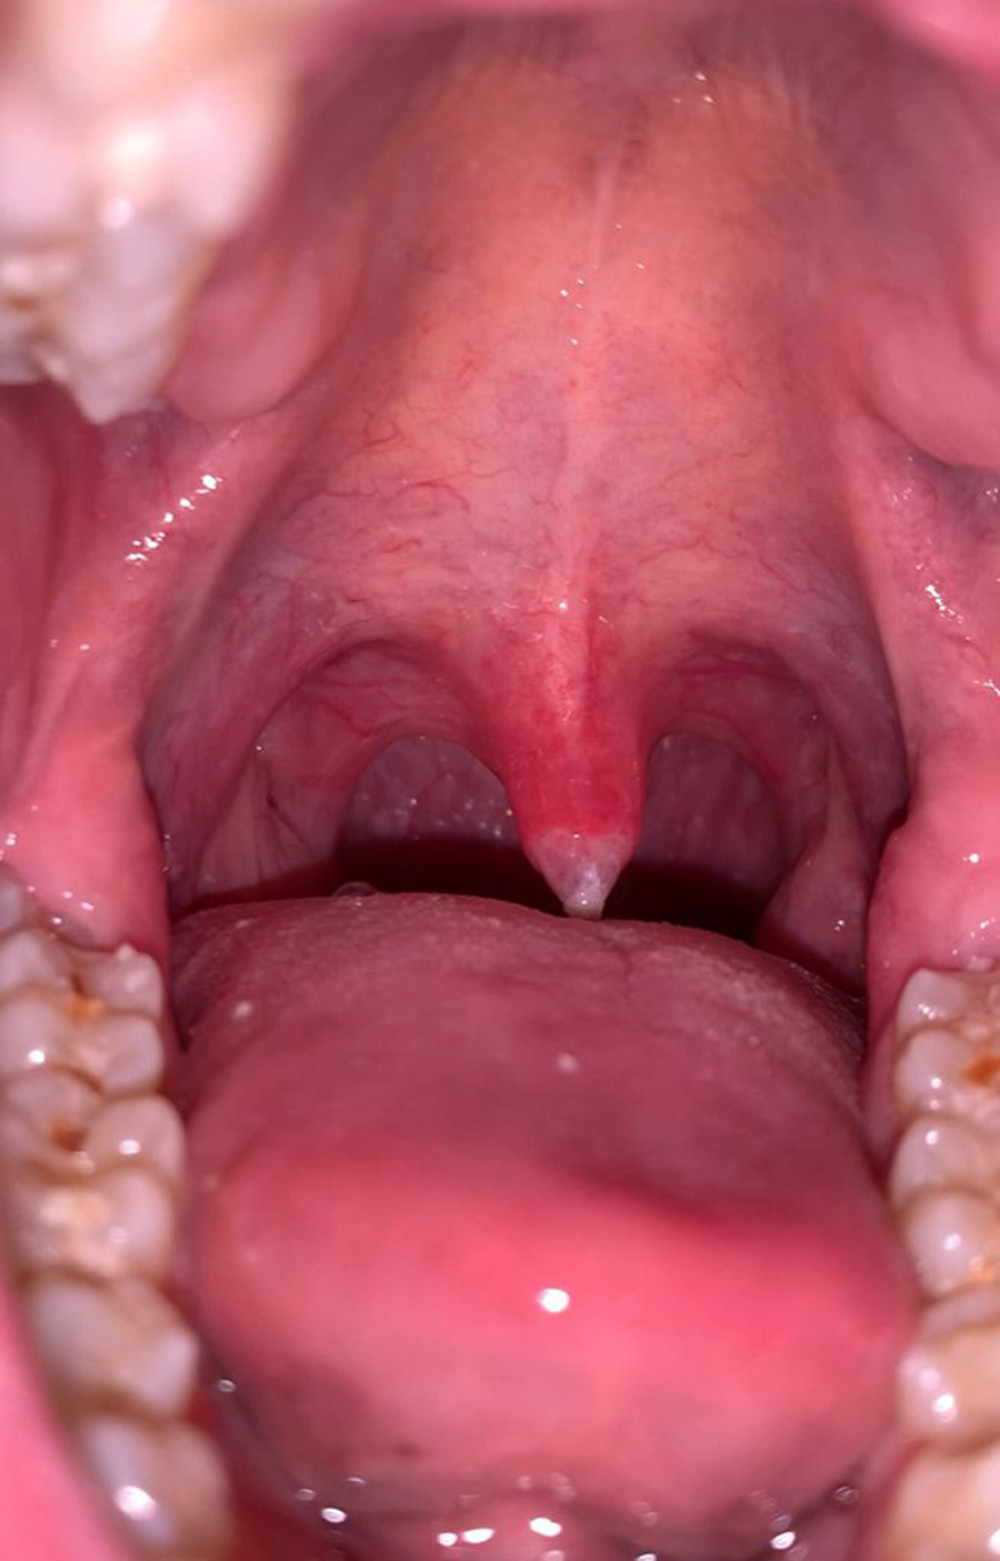 A necrotized uvula with yellow exudate and partially sloughed mucosa was observed on day 4 after EGD.